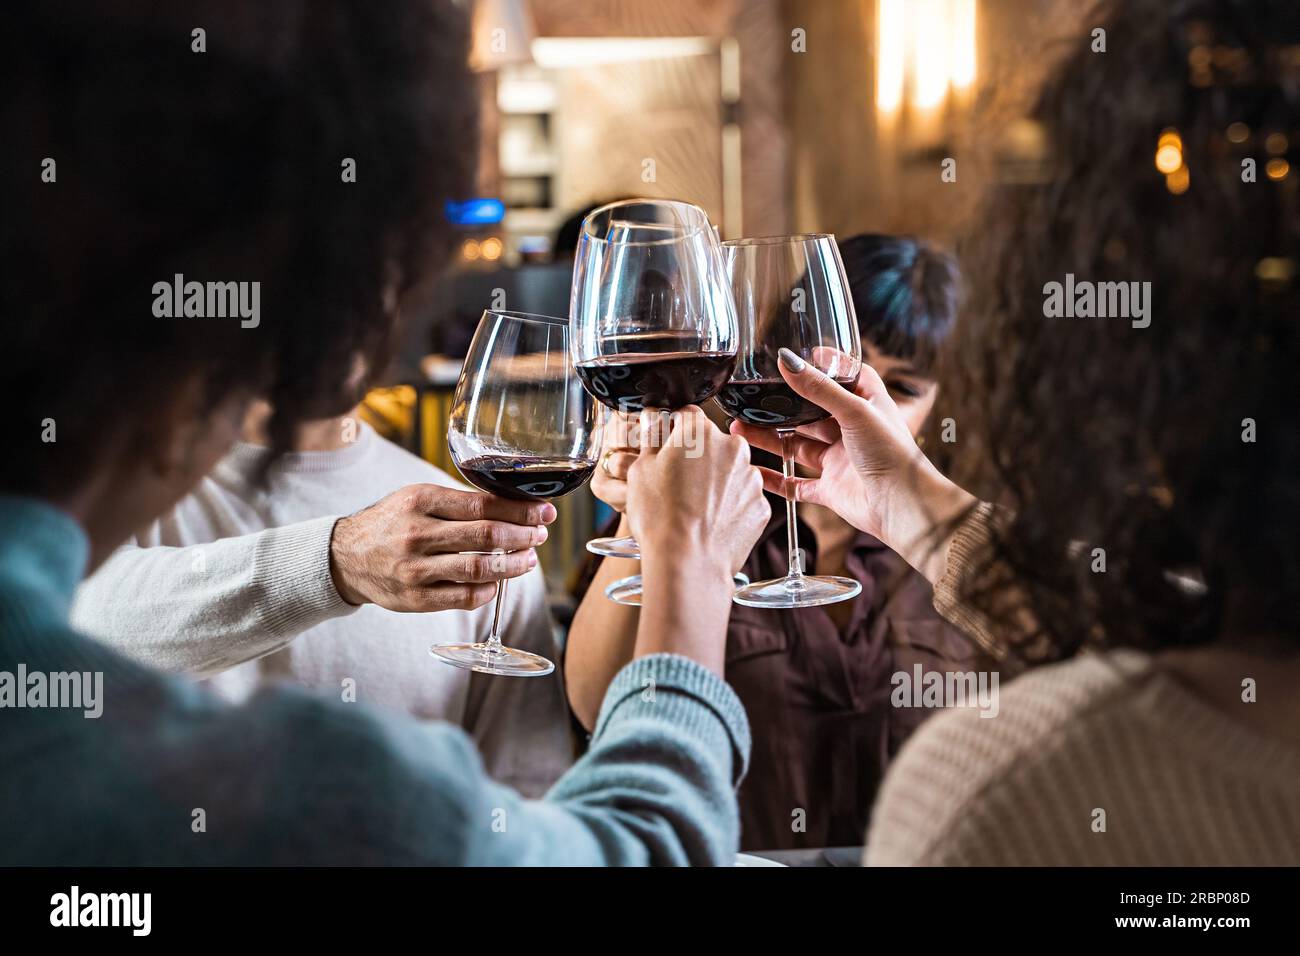 Multicultural friends raise wine glasses for a toast in an elegant restaurant. Viewed from outside through a window, the focus is on the glasses. Stock Photo